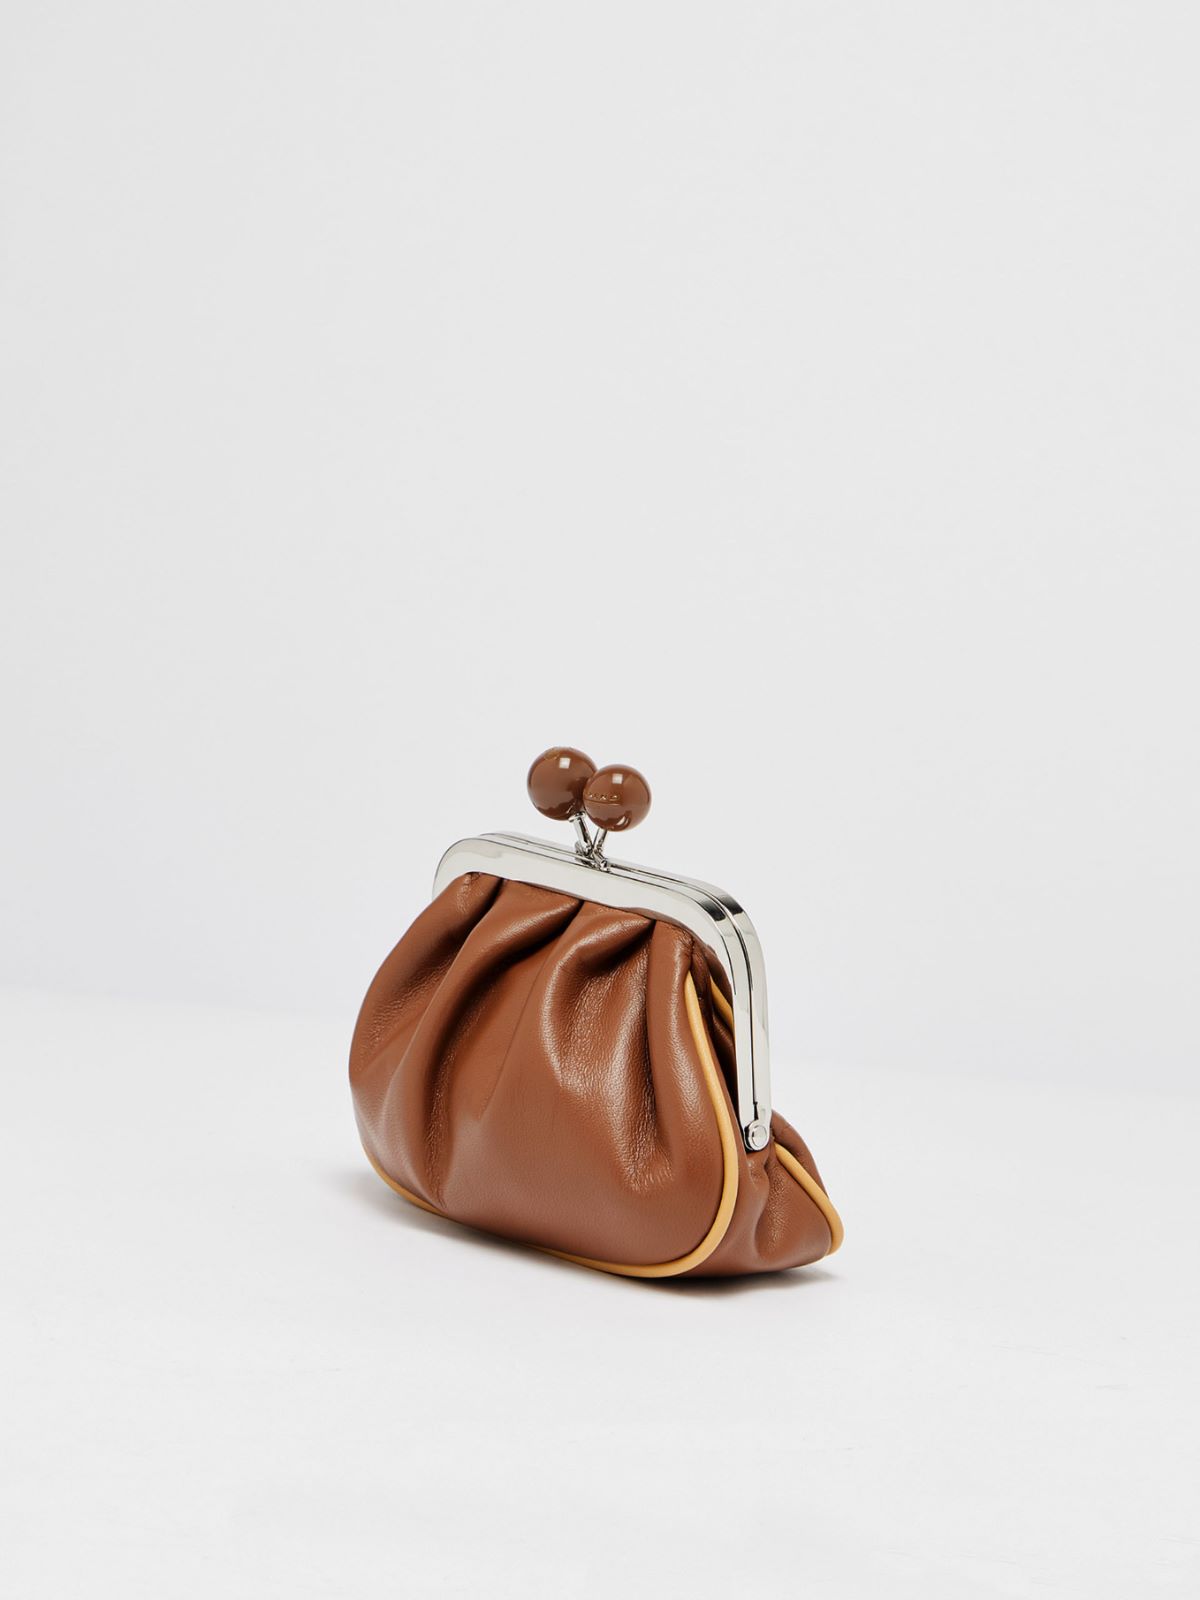 Extra Small Pasticcino Bag in nappa leather - TOBACCO - Weekend Max Mara - 2